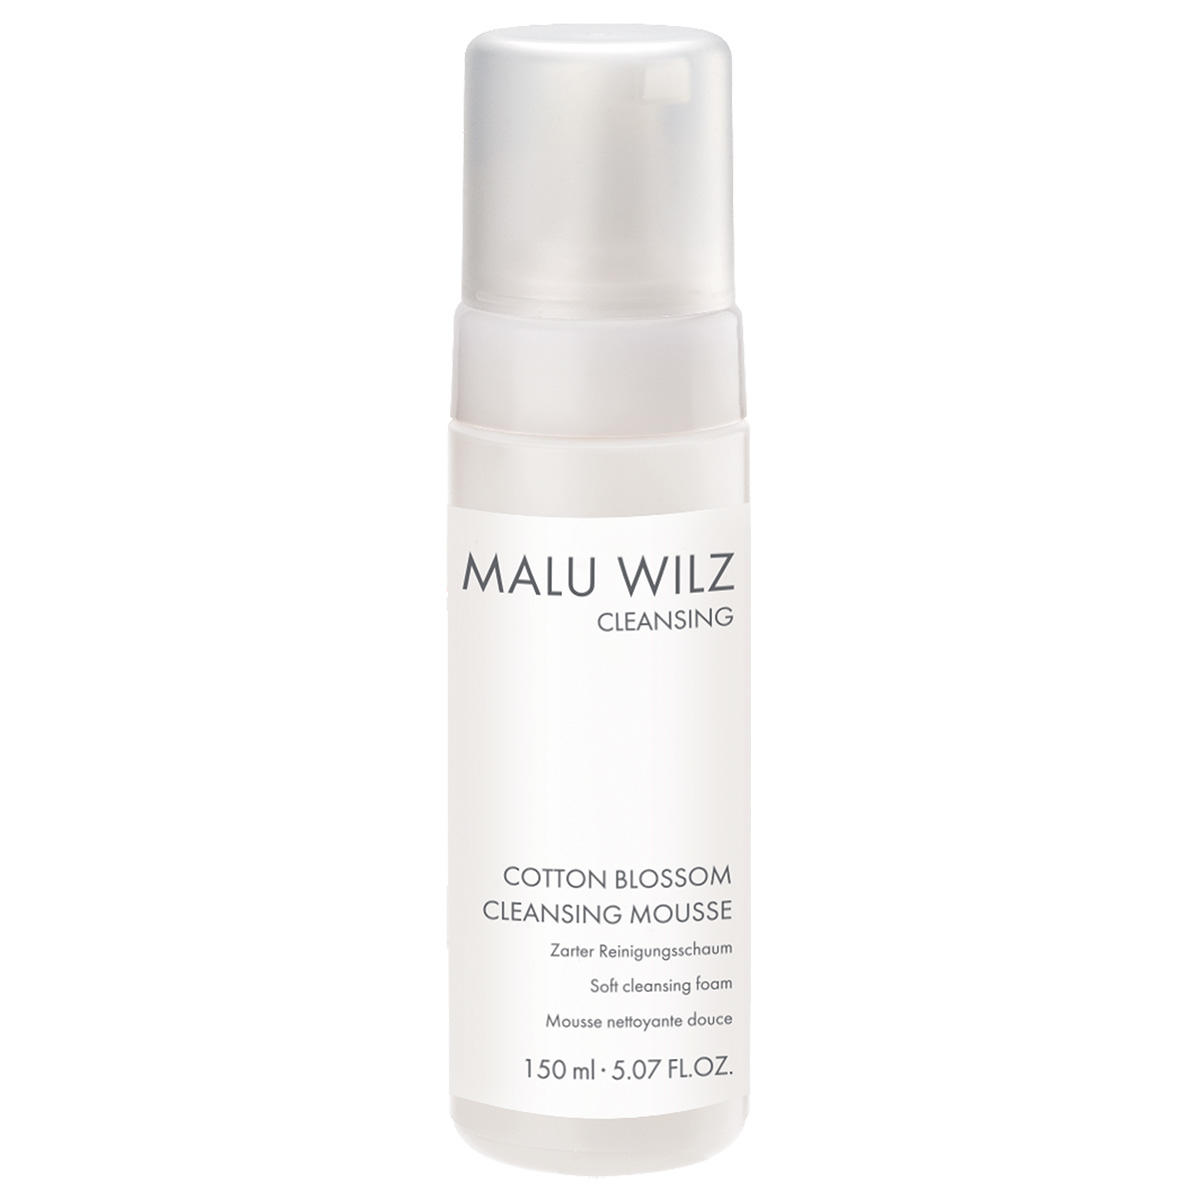 malu wilz cleansing cotton blossom cleansing mousse 150 ml